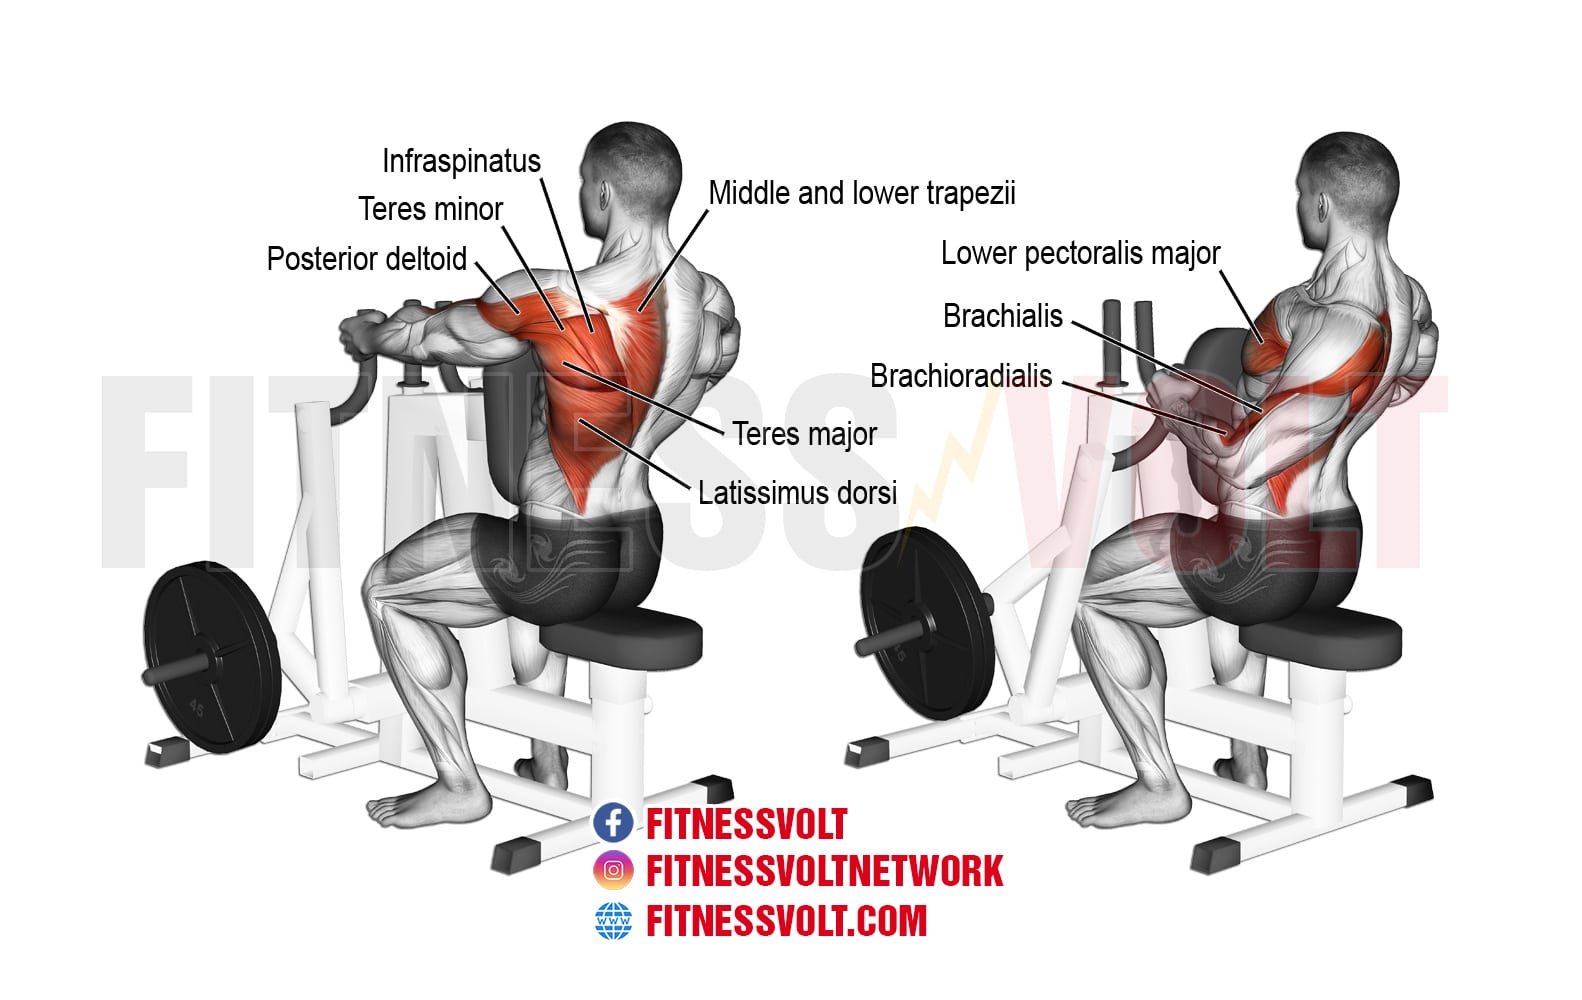 Male Fitness Enthusiast Using A Seated Rowing Machine Picture And HD Photos